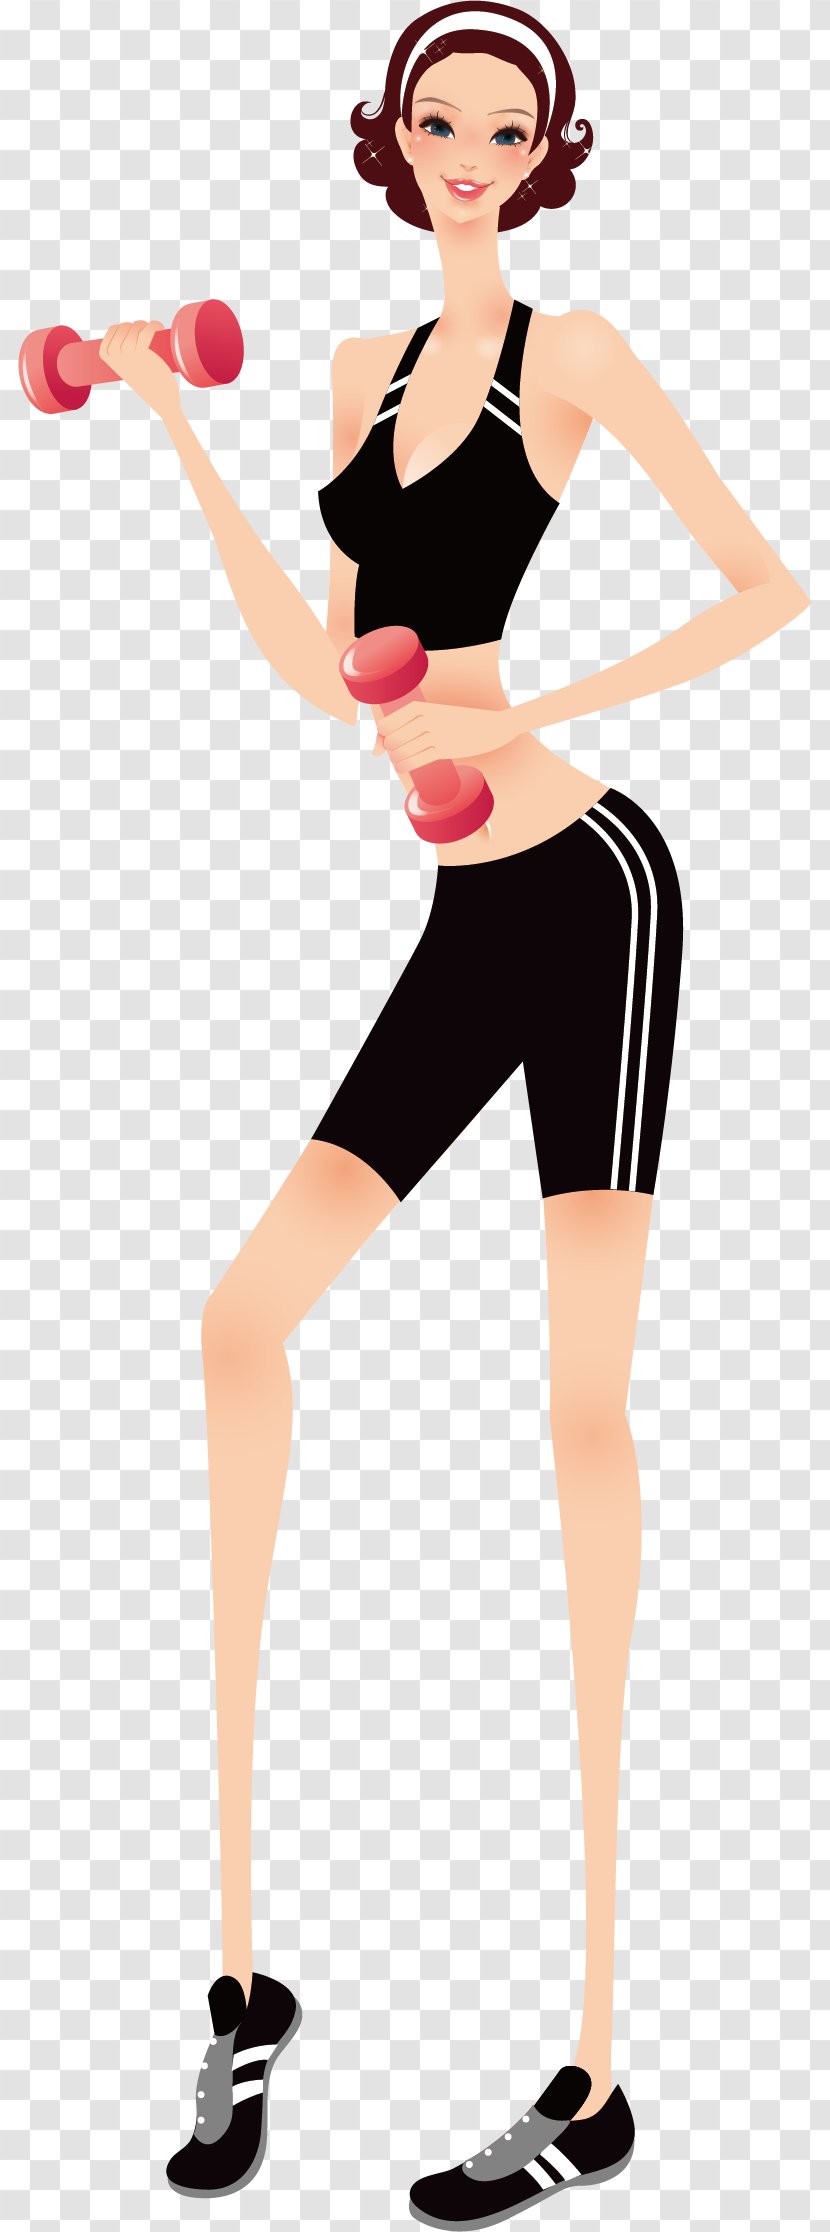 Cartoon Illustration - Hold The Barbell Transparent PNG